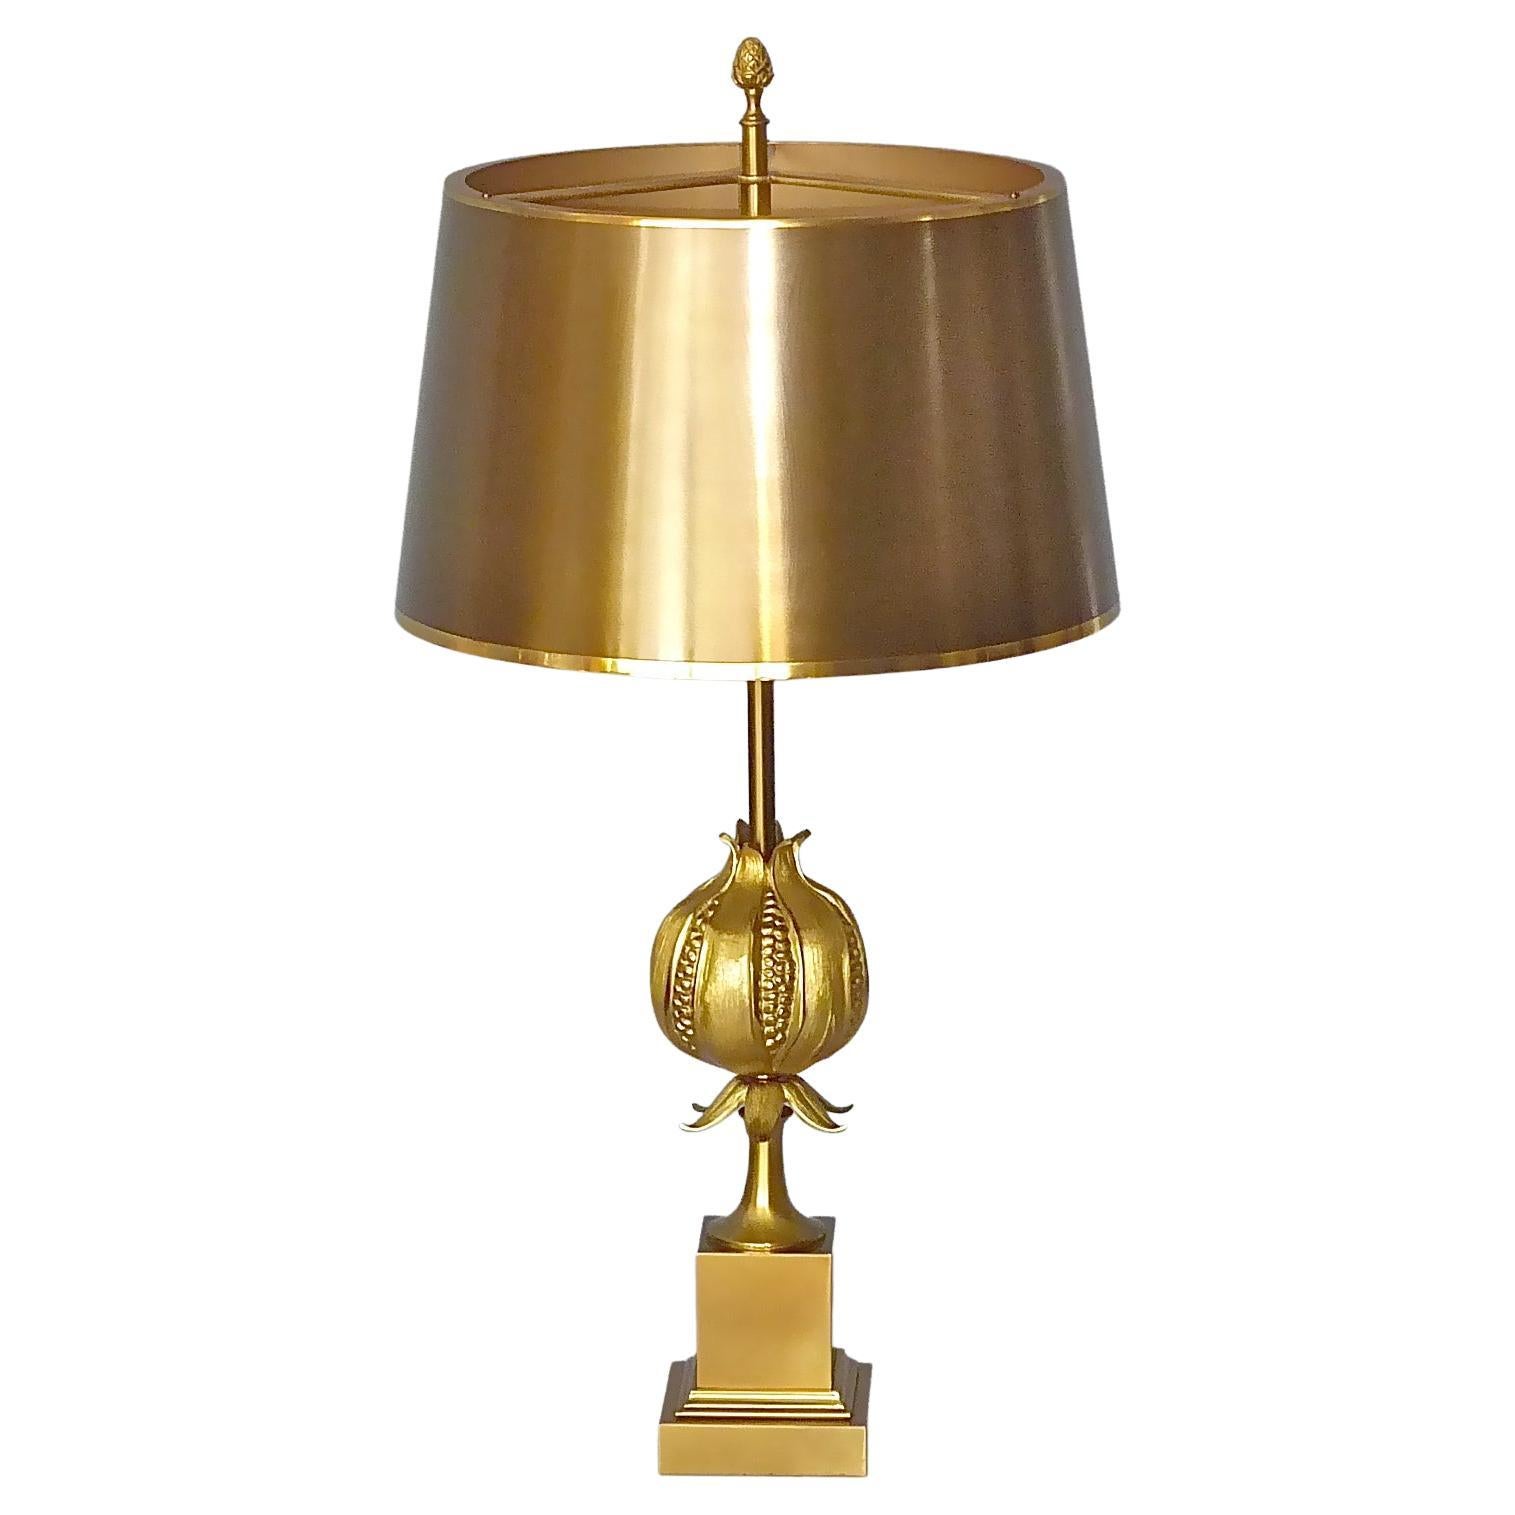 Rare Signed Gilt Bronze French Table Lamp Maison Charles Pomgranate 1970s Jansen For Sale